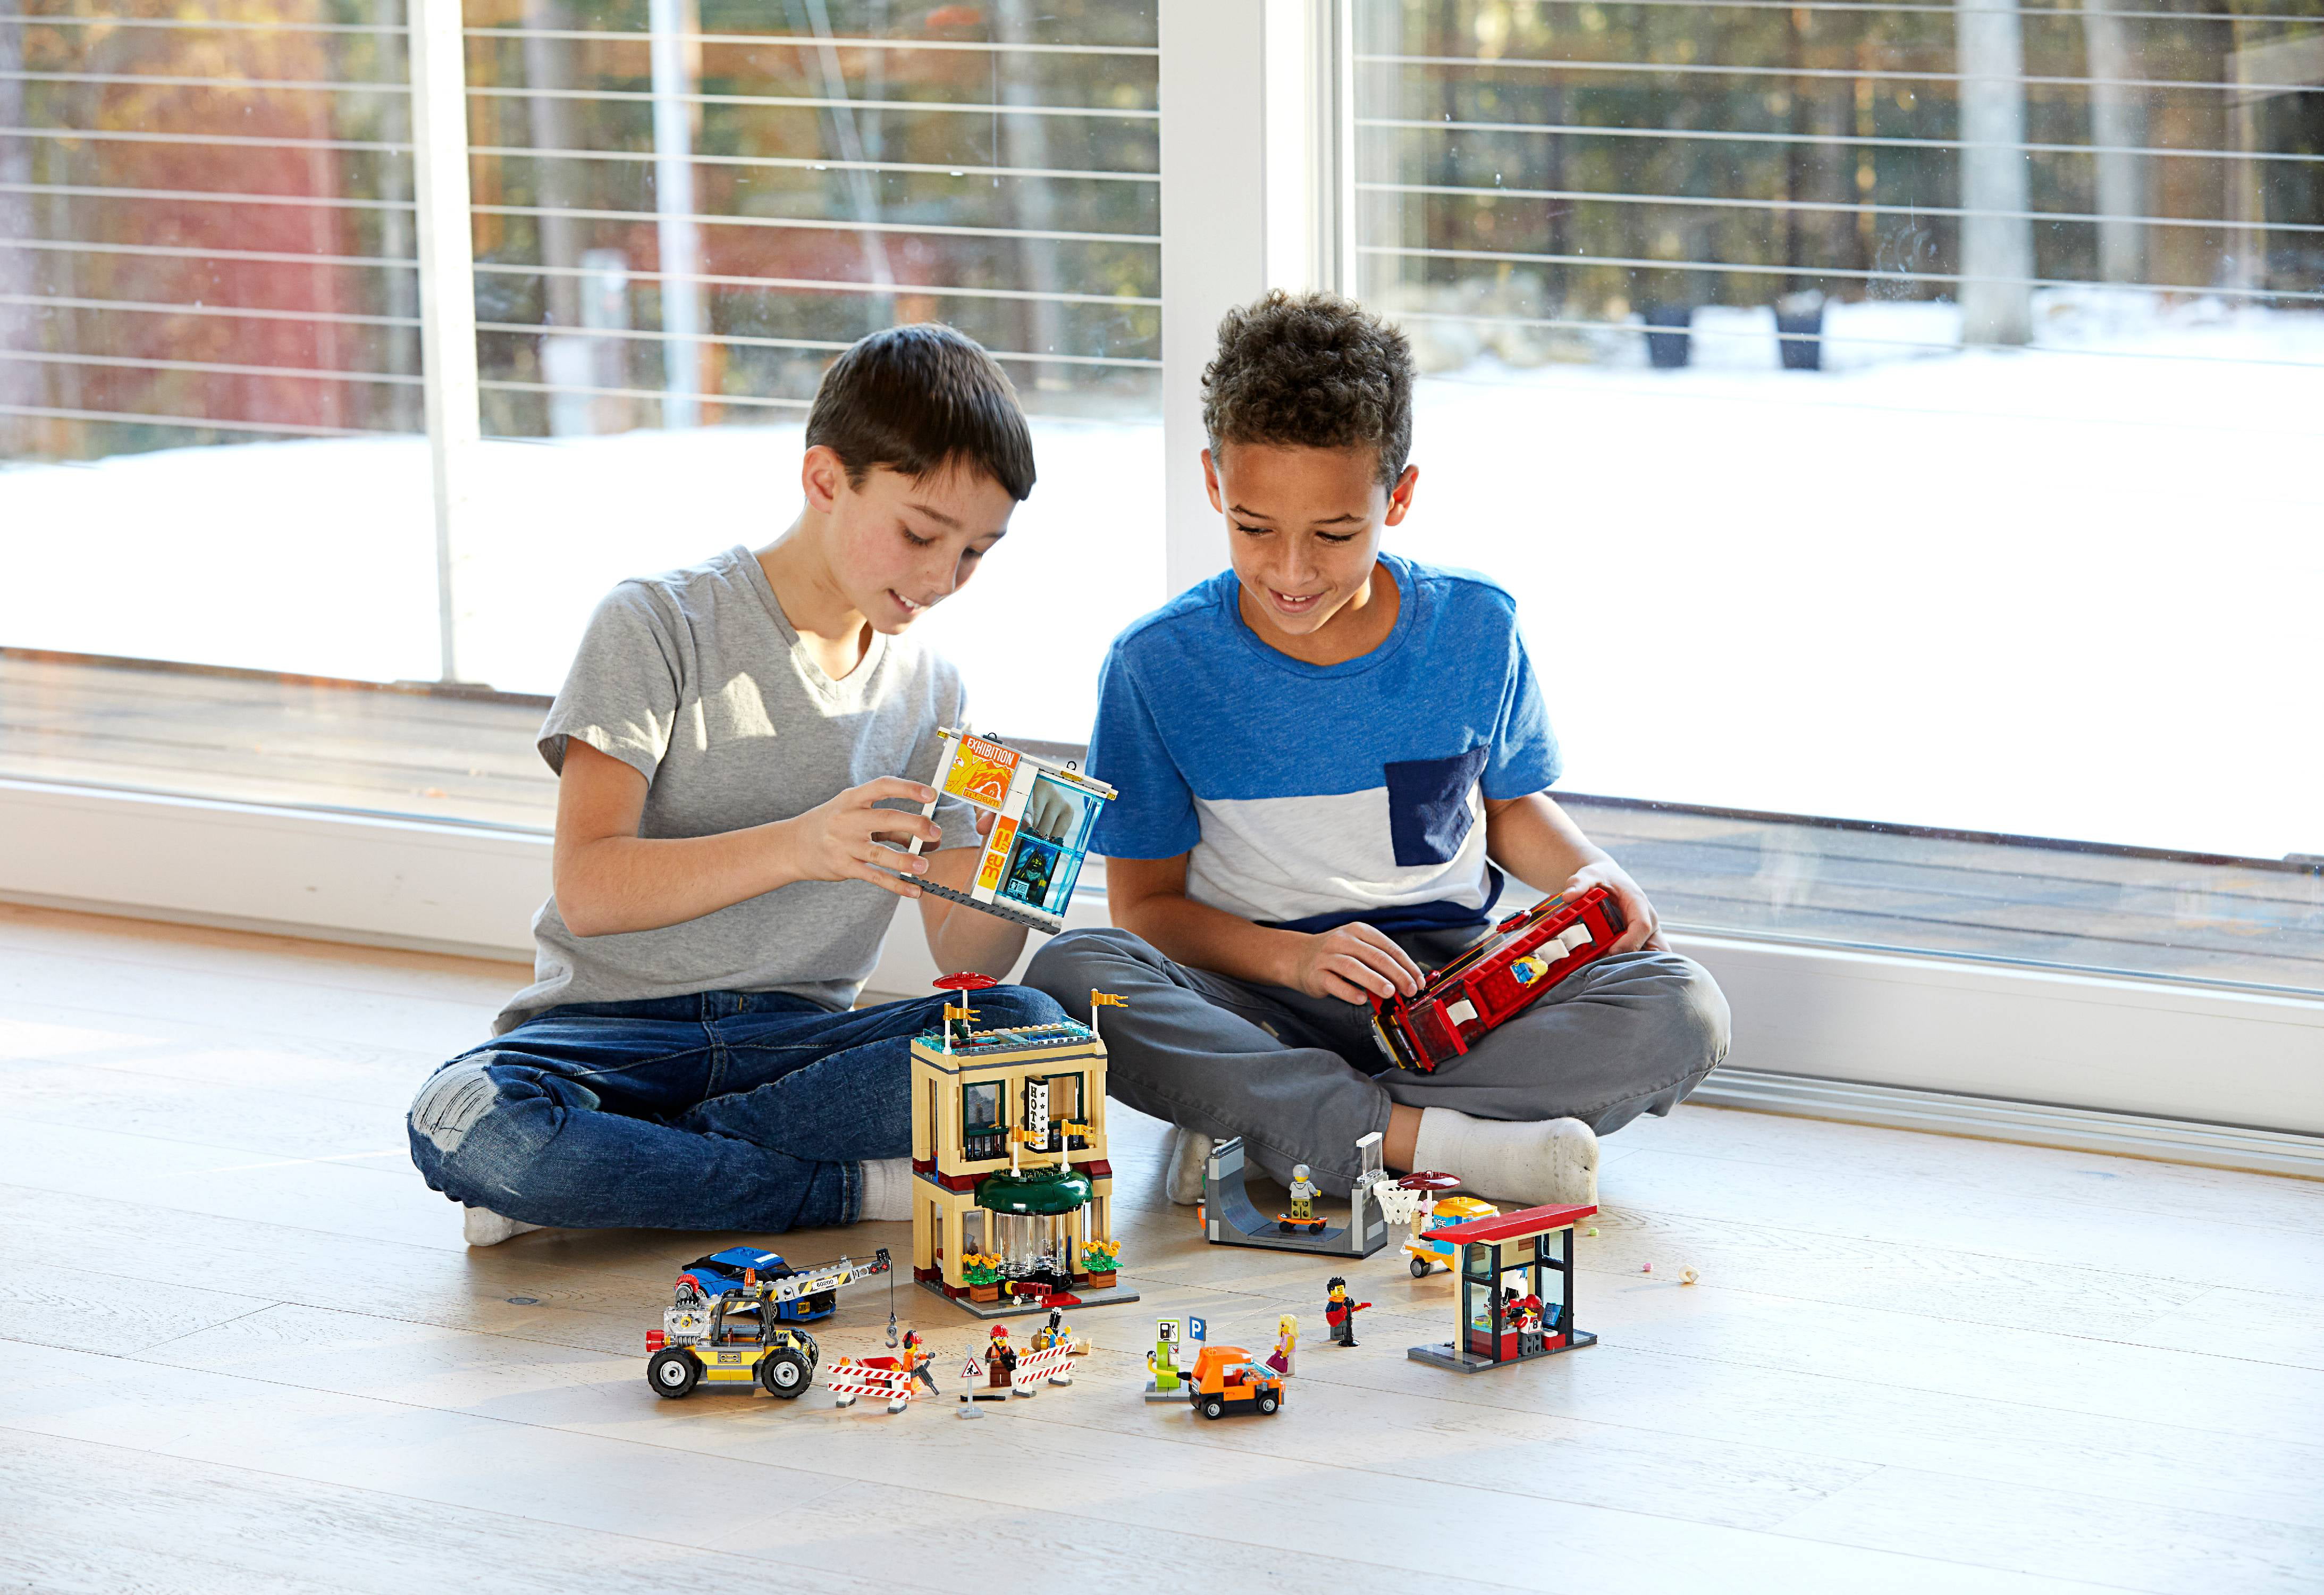 Capital City 60200 | City | Buy online at the Official LEGO® Shop US